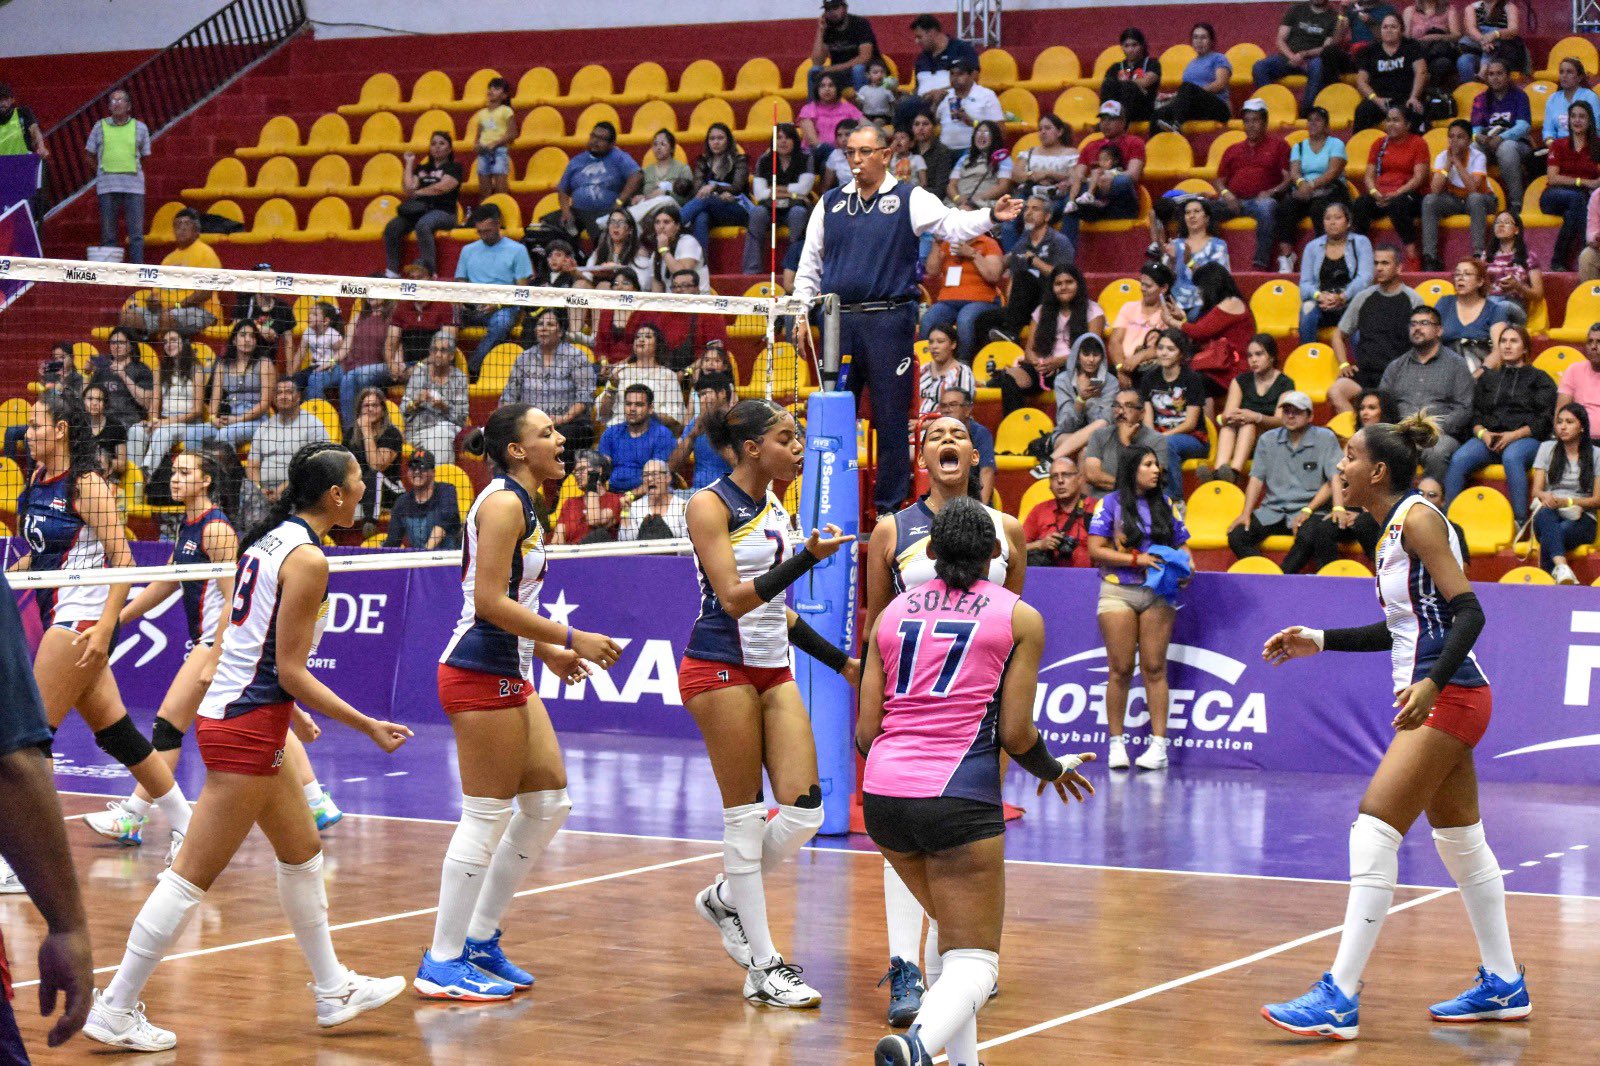 Dominicans battle to beat Costa Rica in U21 Pan Am opening